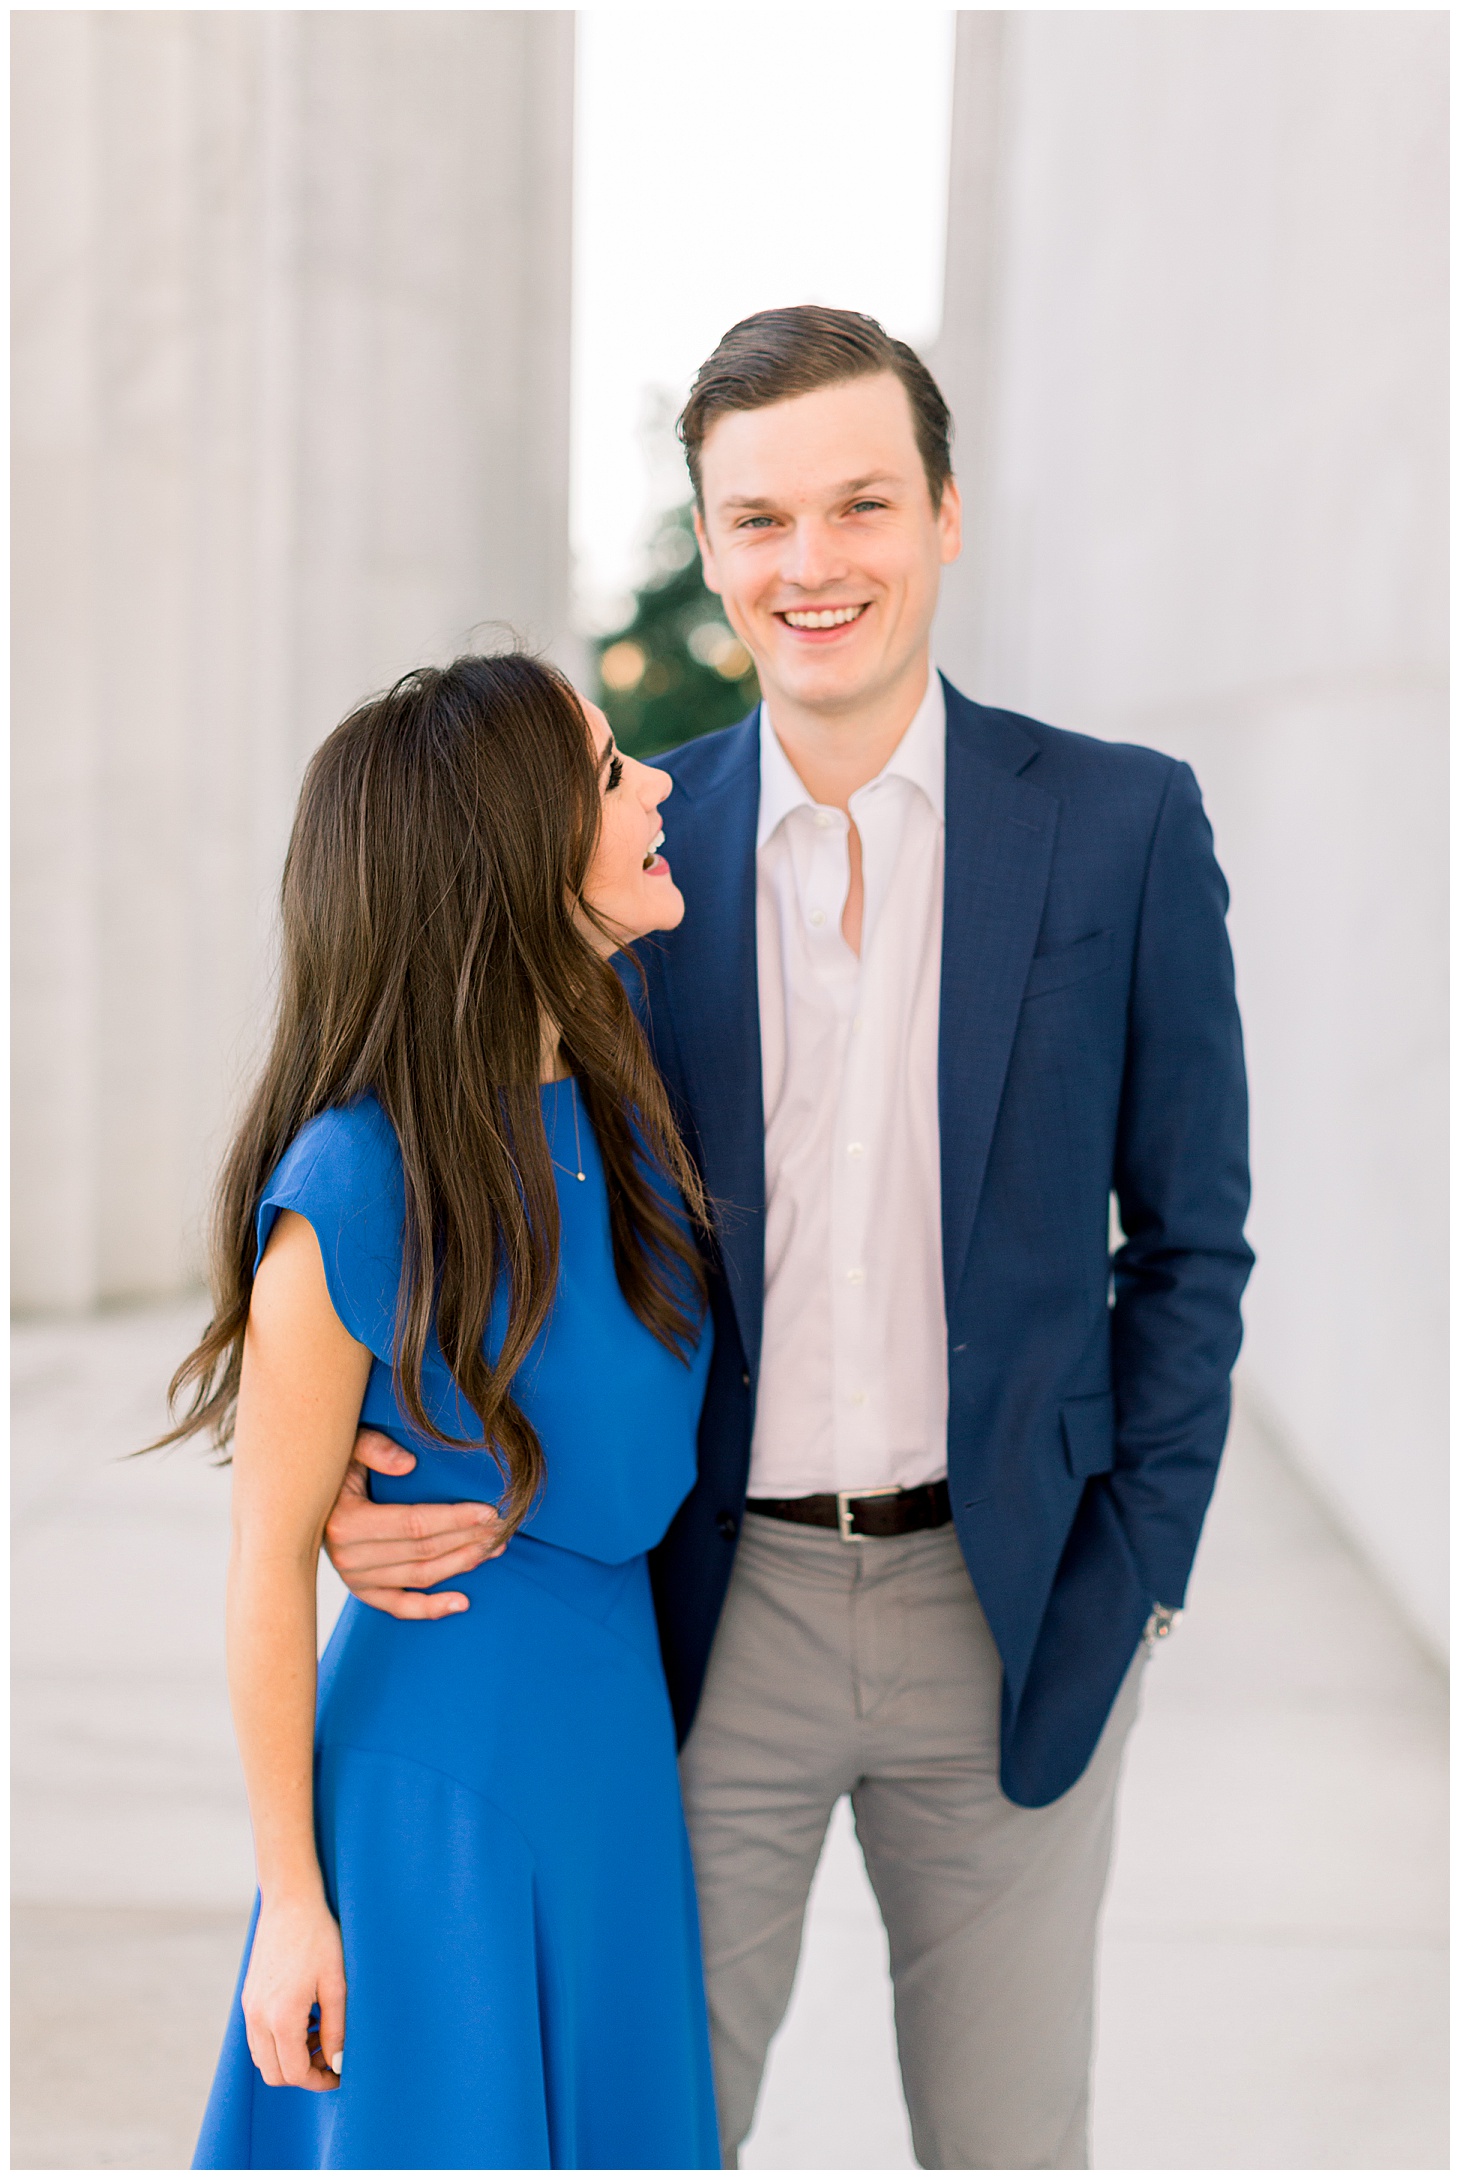  Portraits at Lincoln Memorial, Sarah Bradshaw Photography, Preppy Morning Engagement Session with Golden Light and Golden Retriever